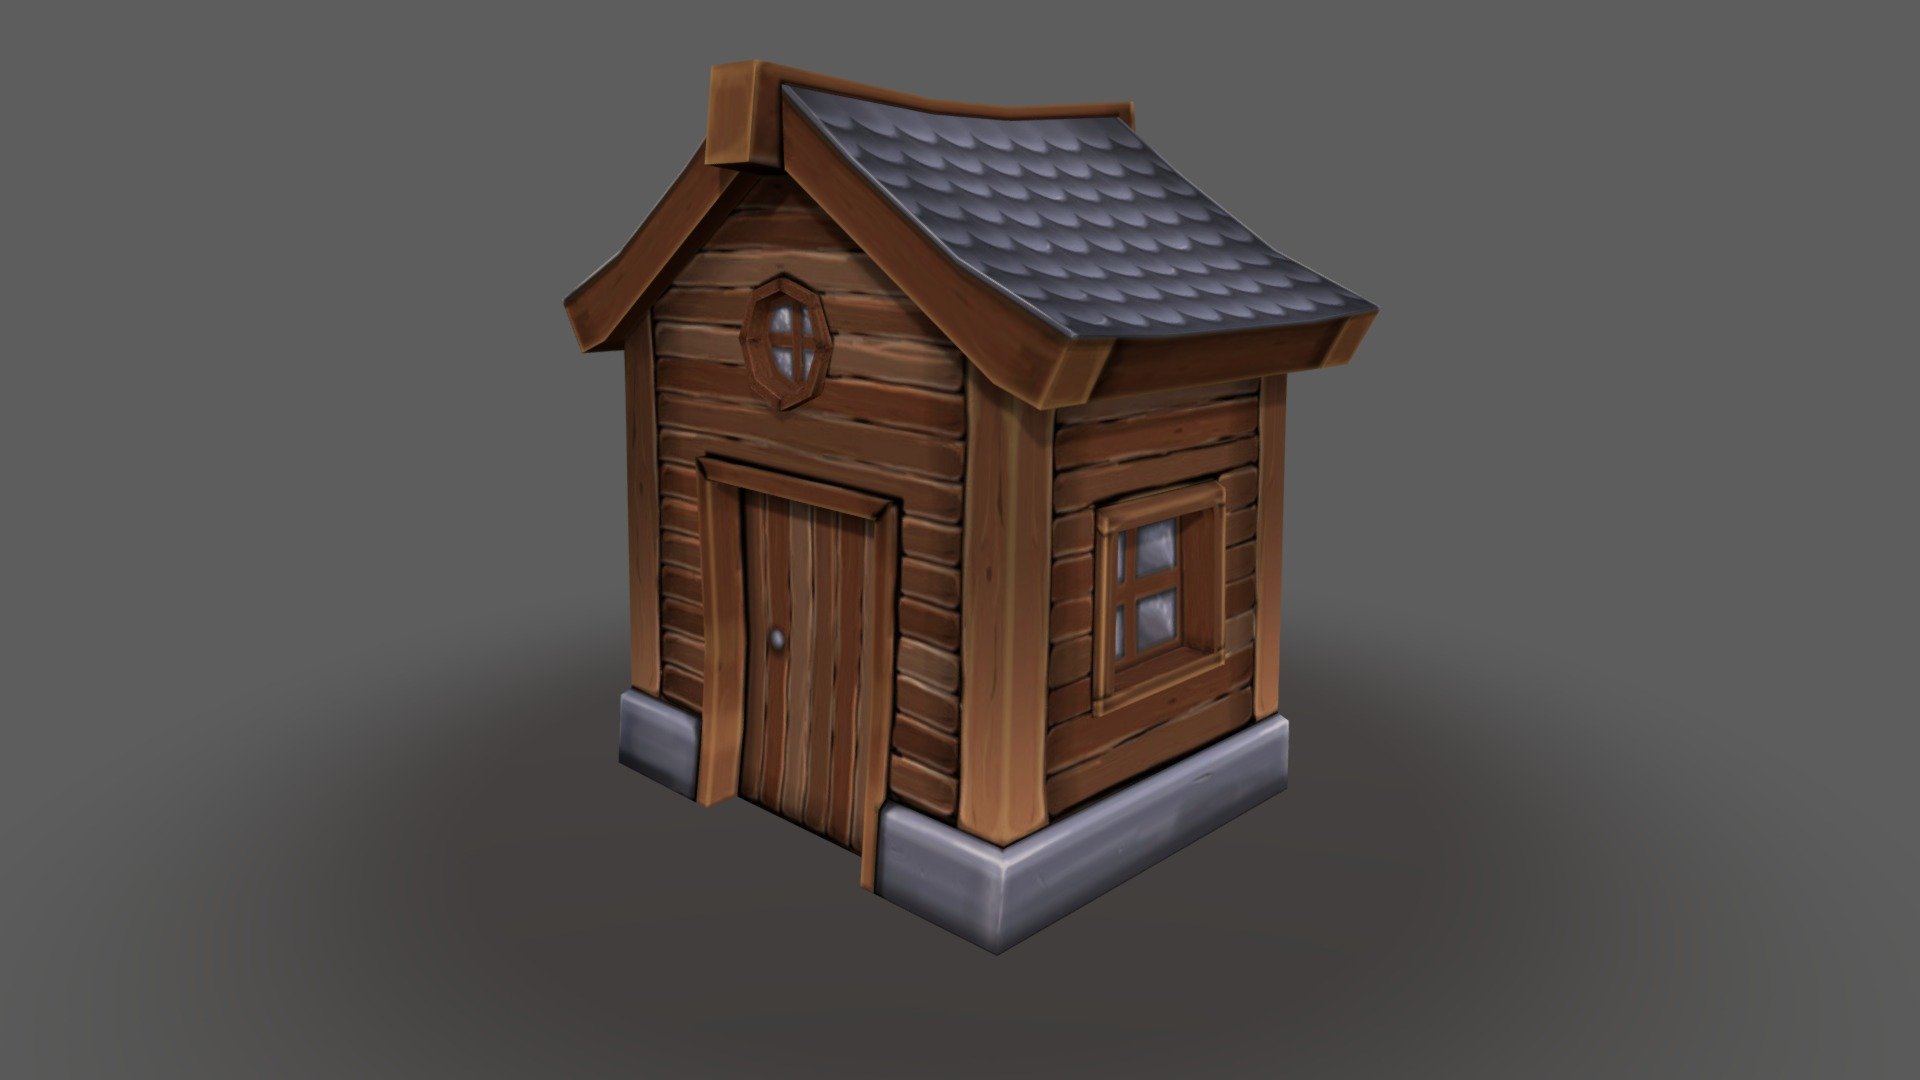 Model: Lowpoly House

Geometry: Quads/Tris

Polycount : 364

Verts: 191

Textures: 1024x1024

Materials: PBR

Rigged: No

Animated: No

UV Mapped: Yes

Unwrapped UV’s: Yes Non Overlapping
 - House - Download Free 3D model by octane2 3d model